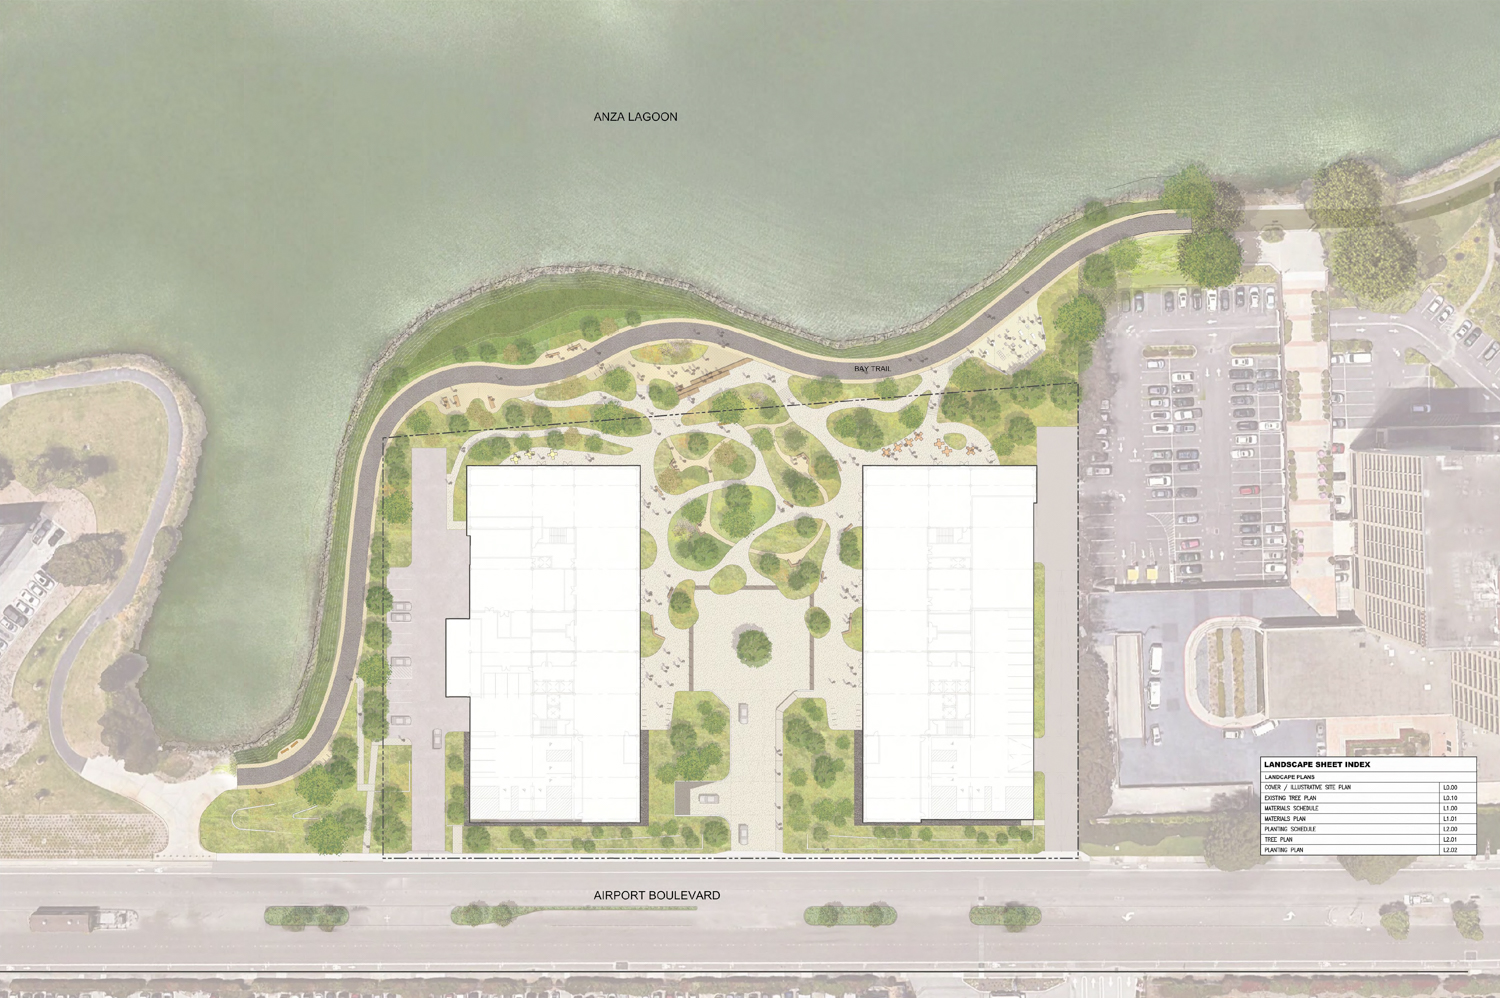 620 Airport Boulevard, site map by CMG